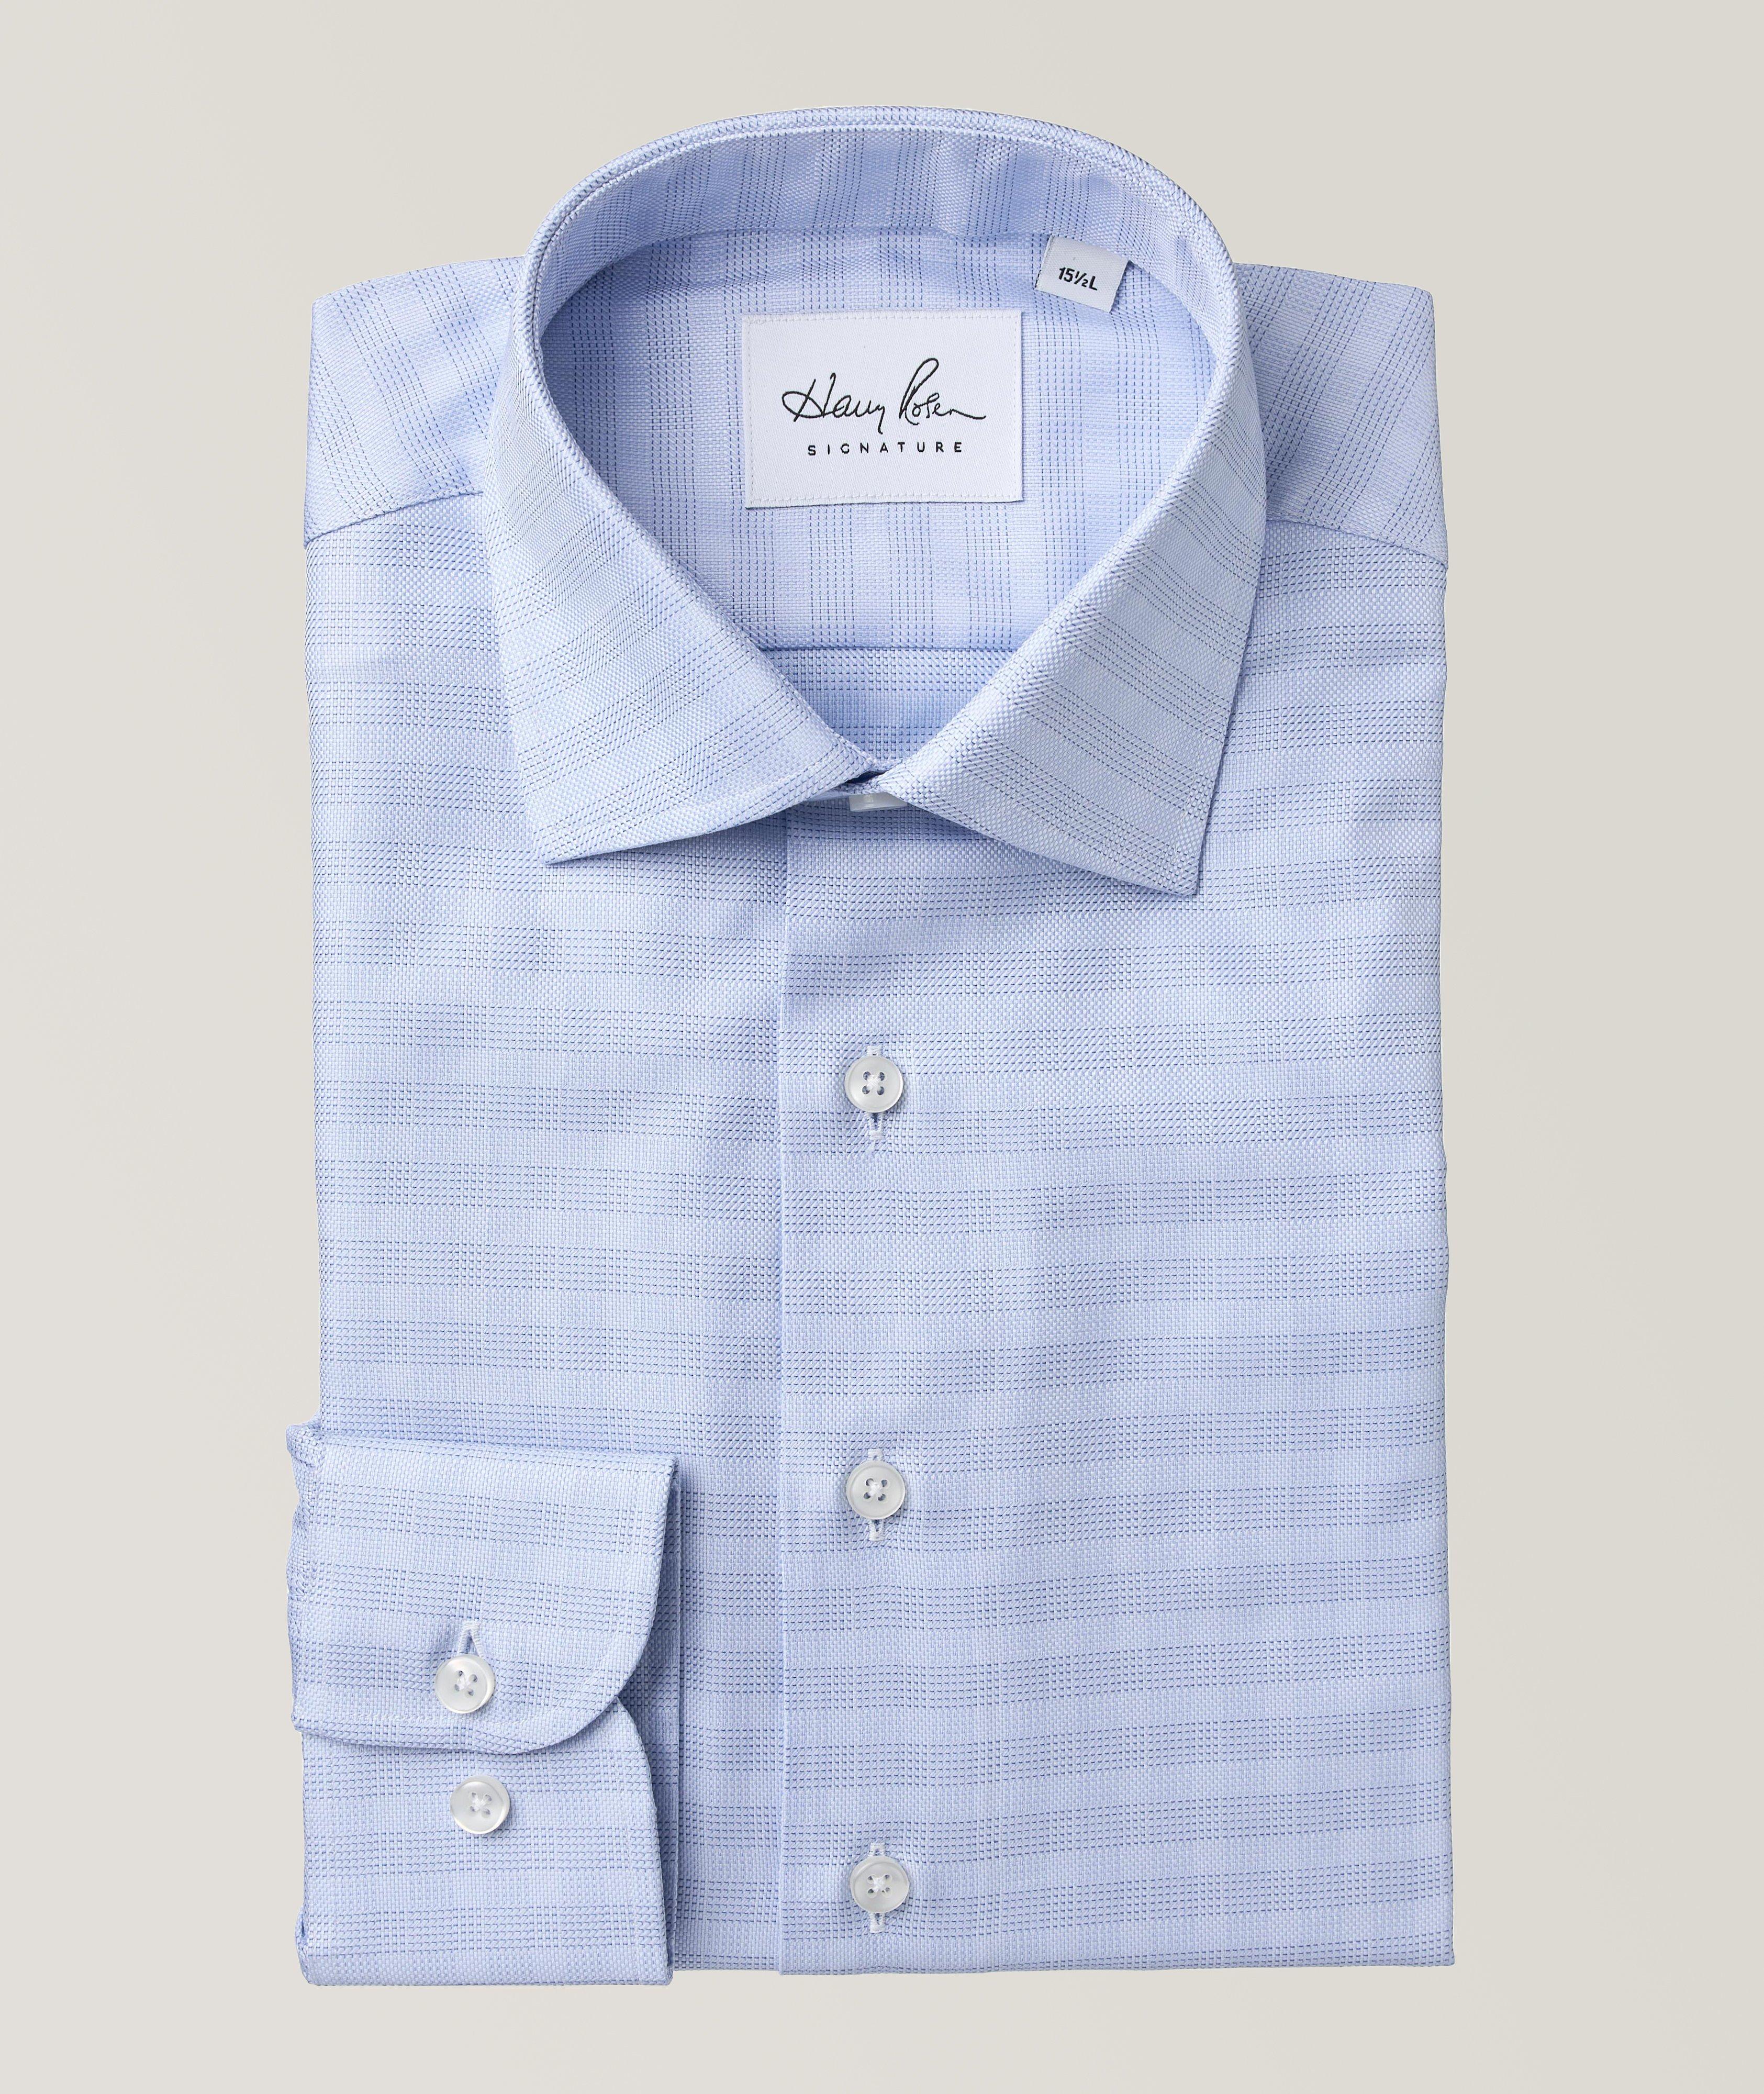 Contemporary-Fit Textured Twill Cotton Dress Shirt image 0